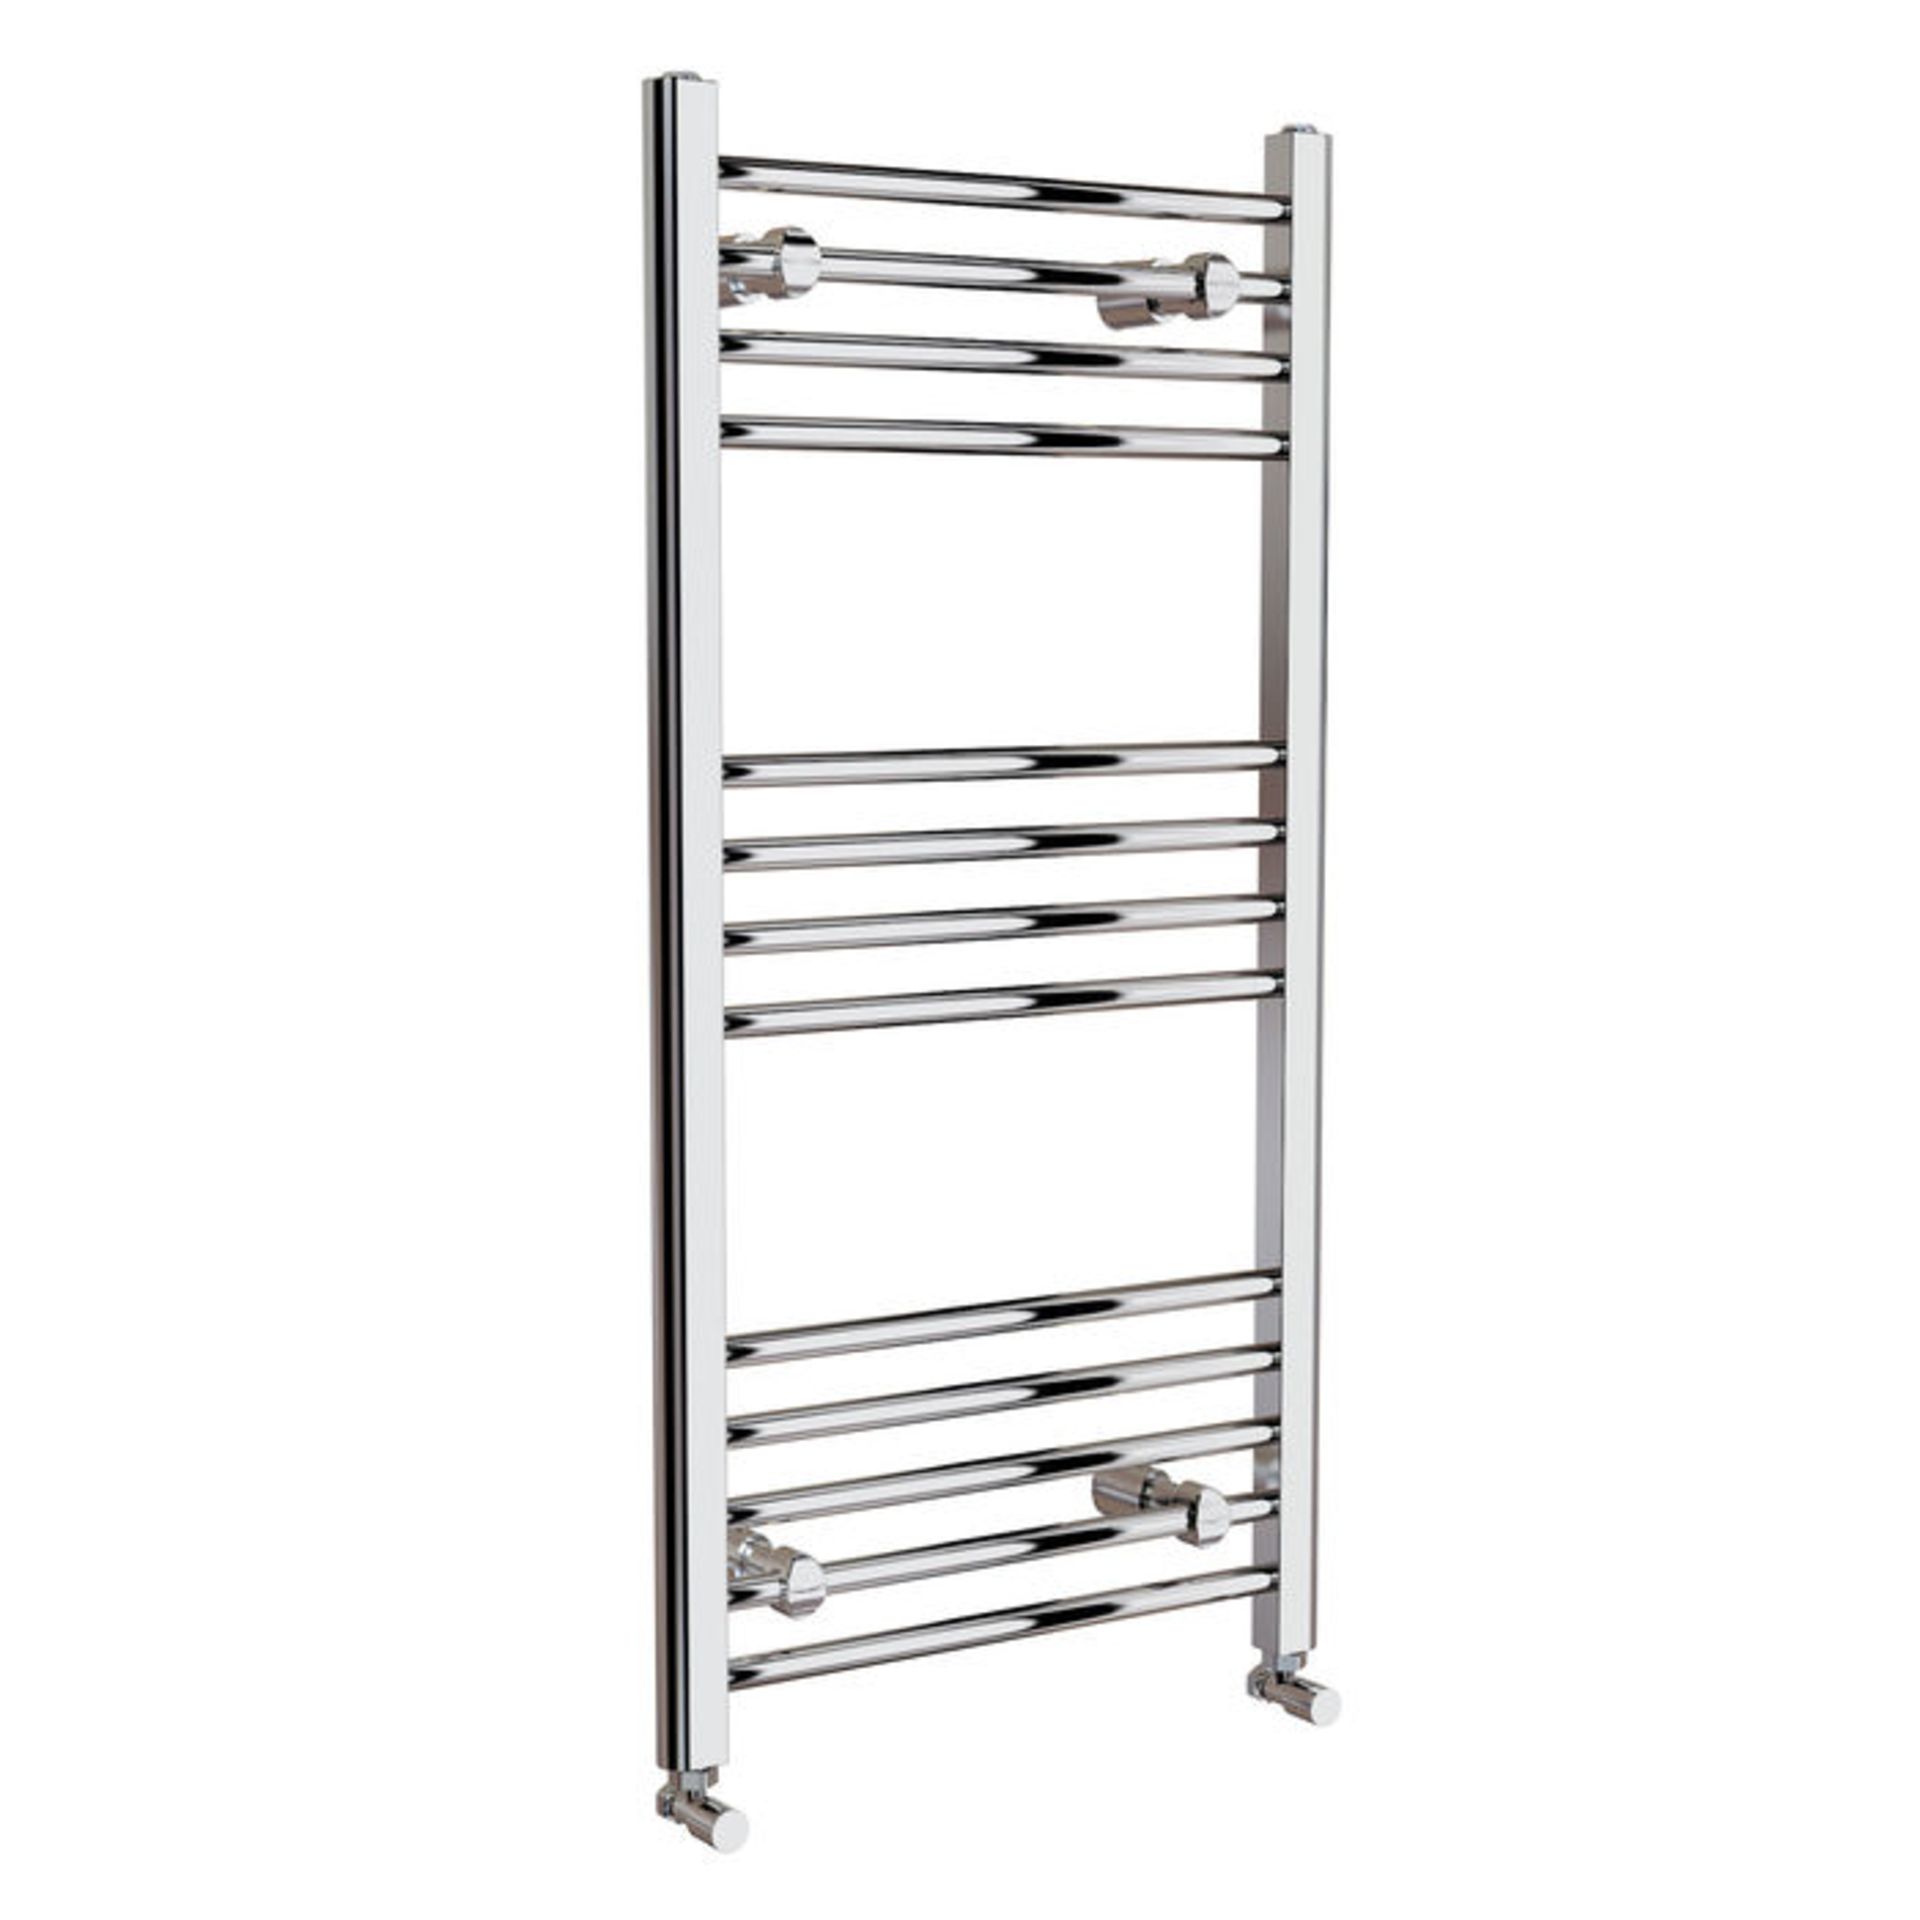 (YC39) 1000x450mm Straight Heated Towel Radiator. Made from chrome plated low carbon steel This